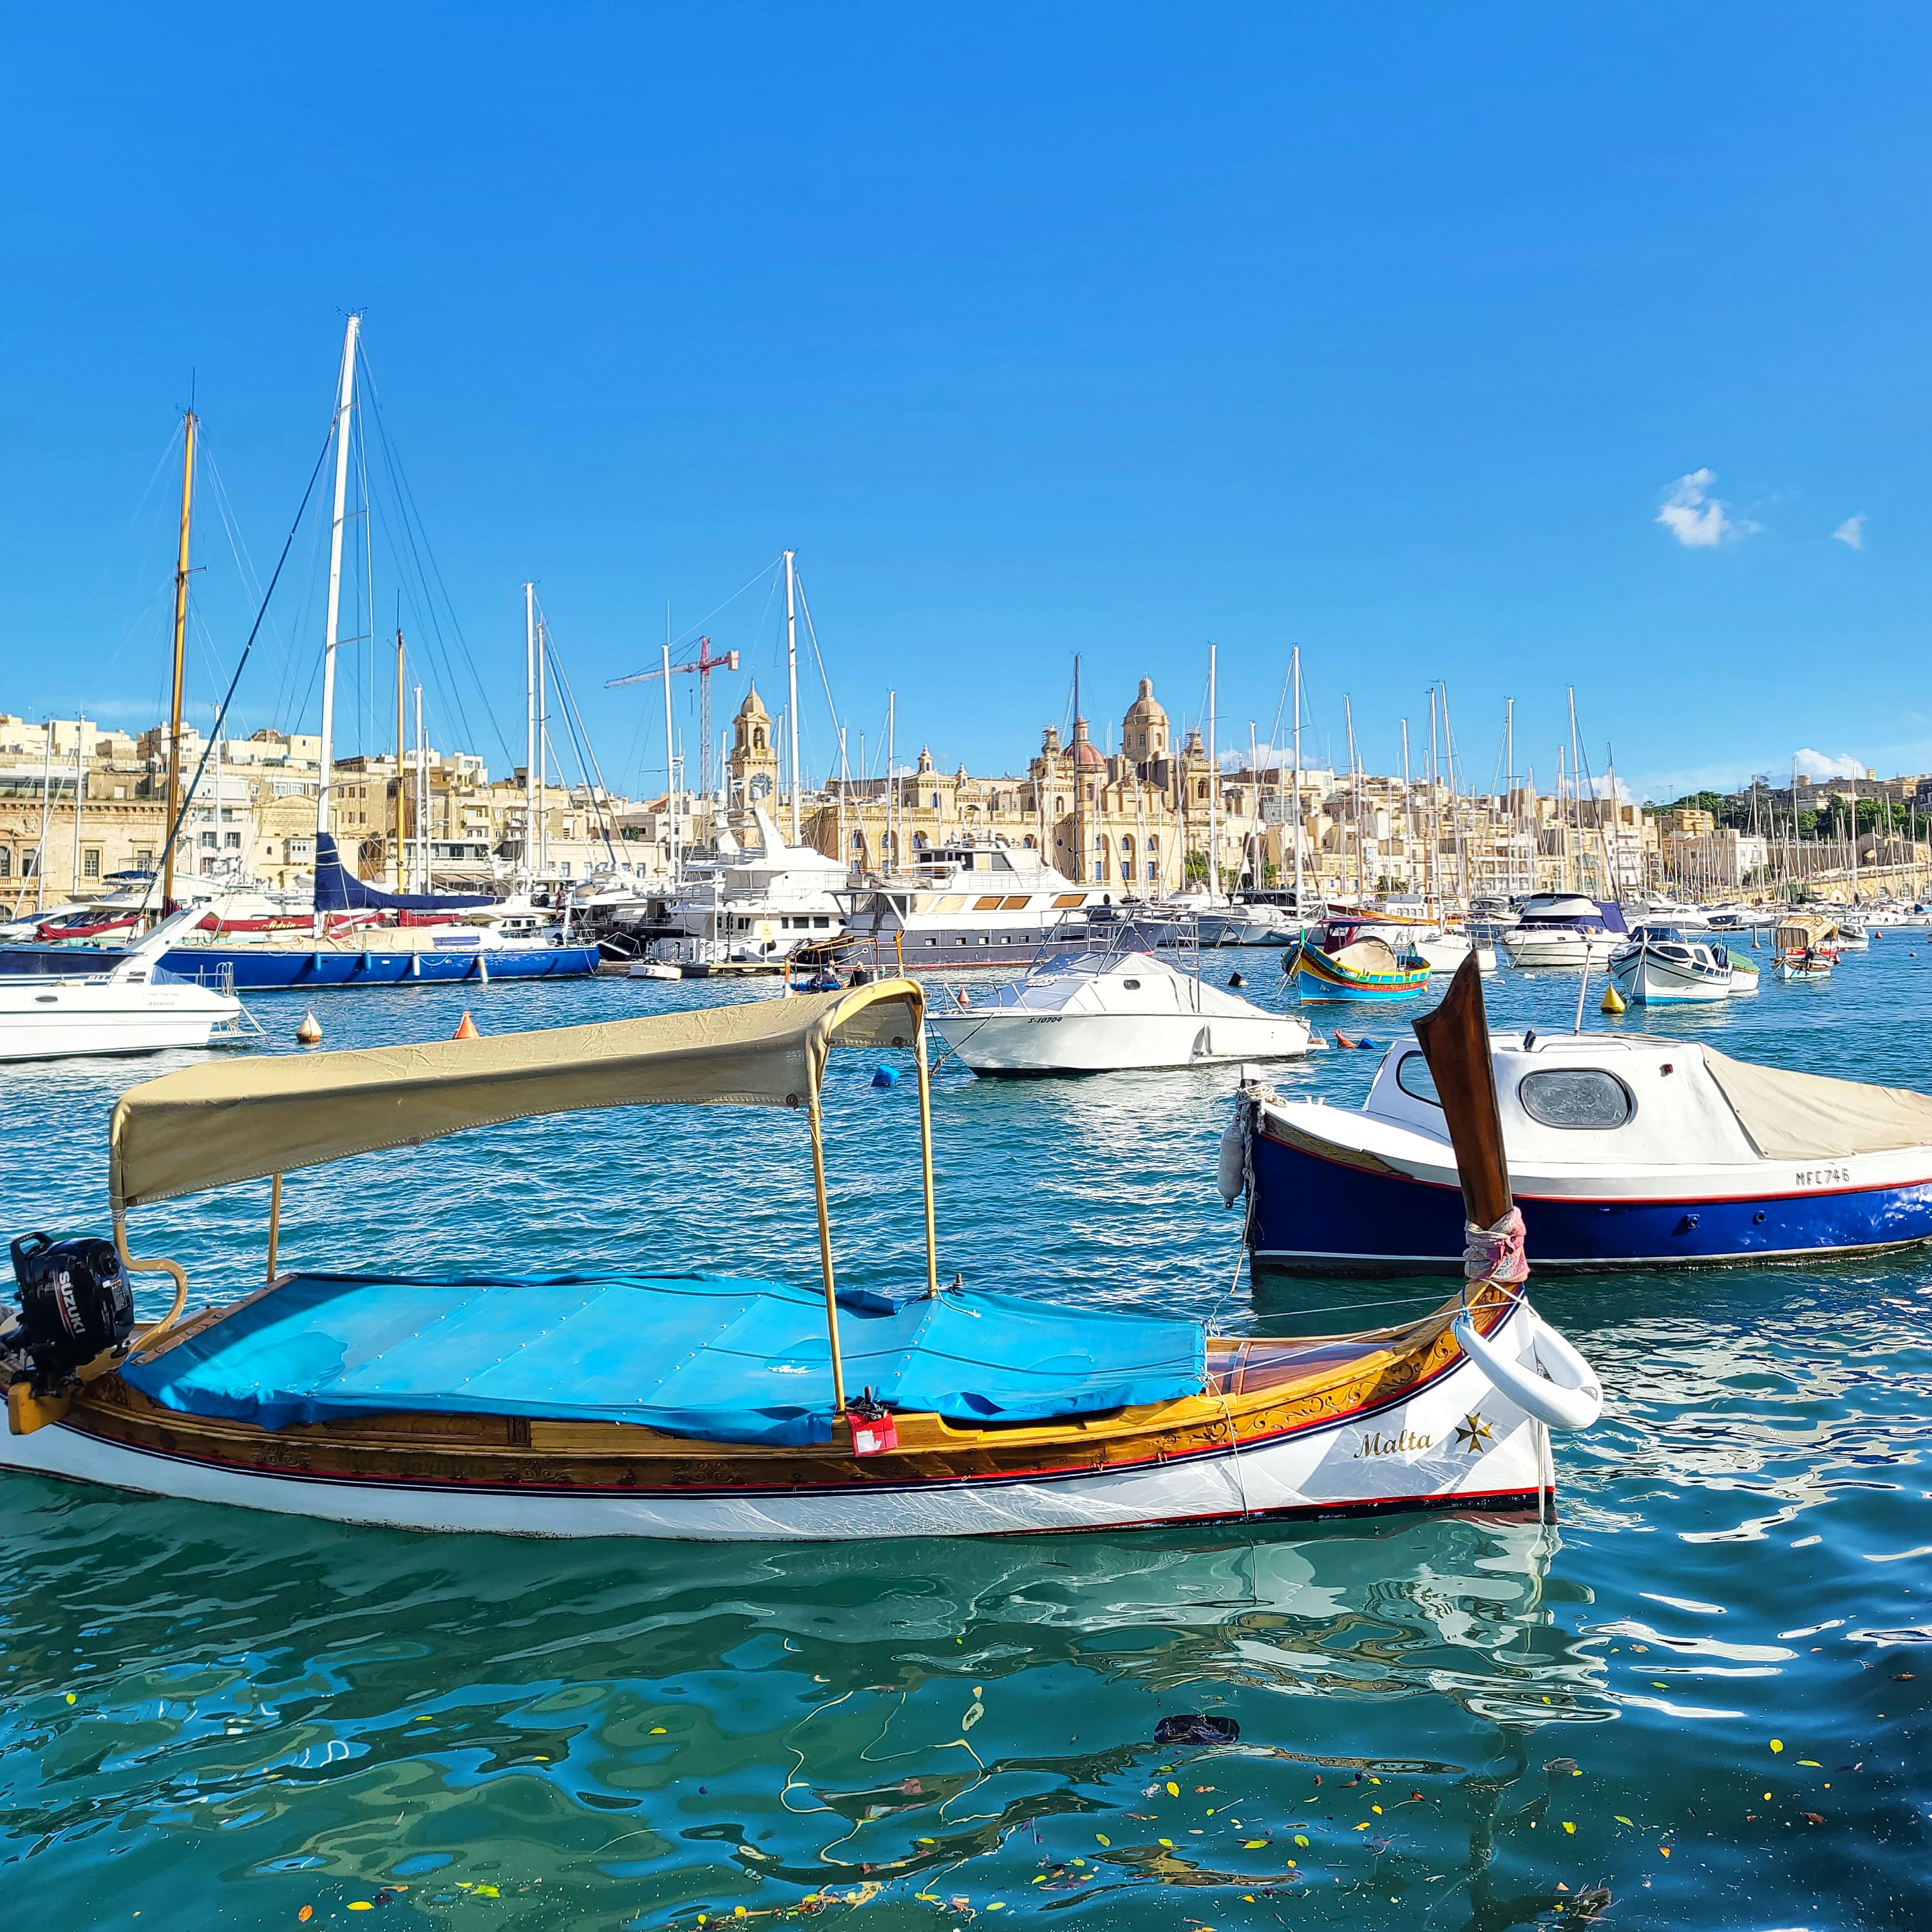 Best Things to do in Valletta